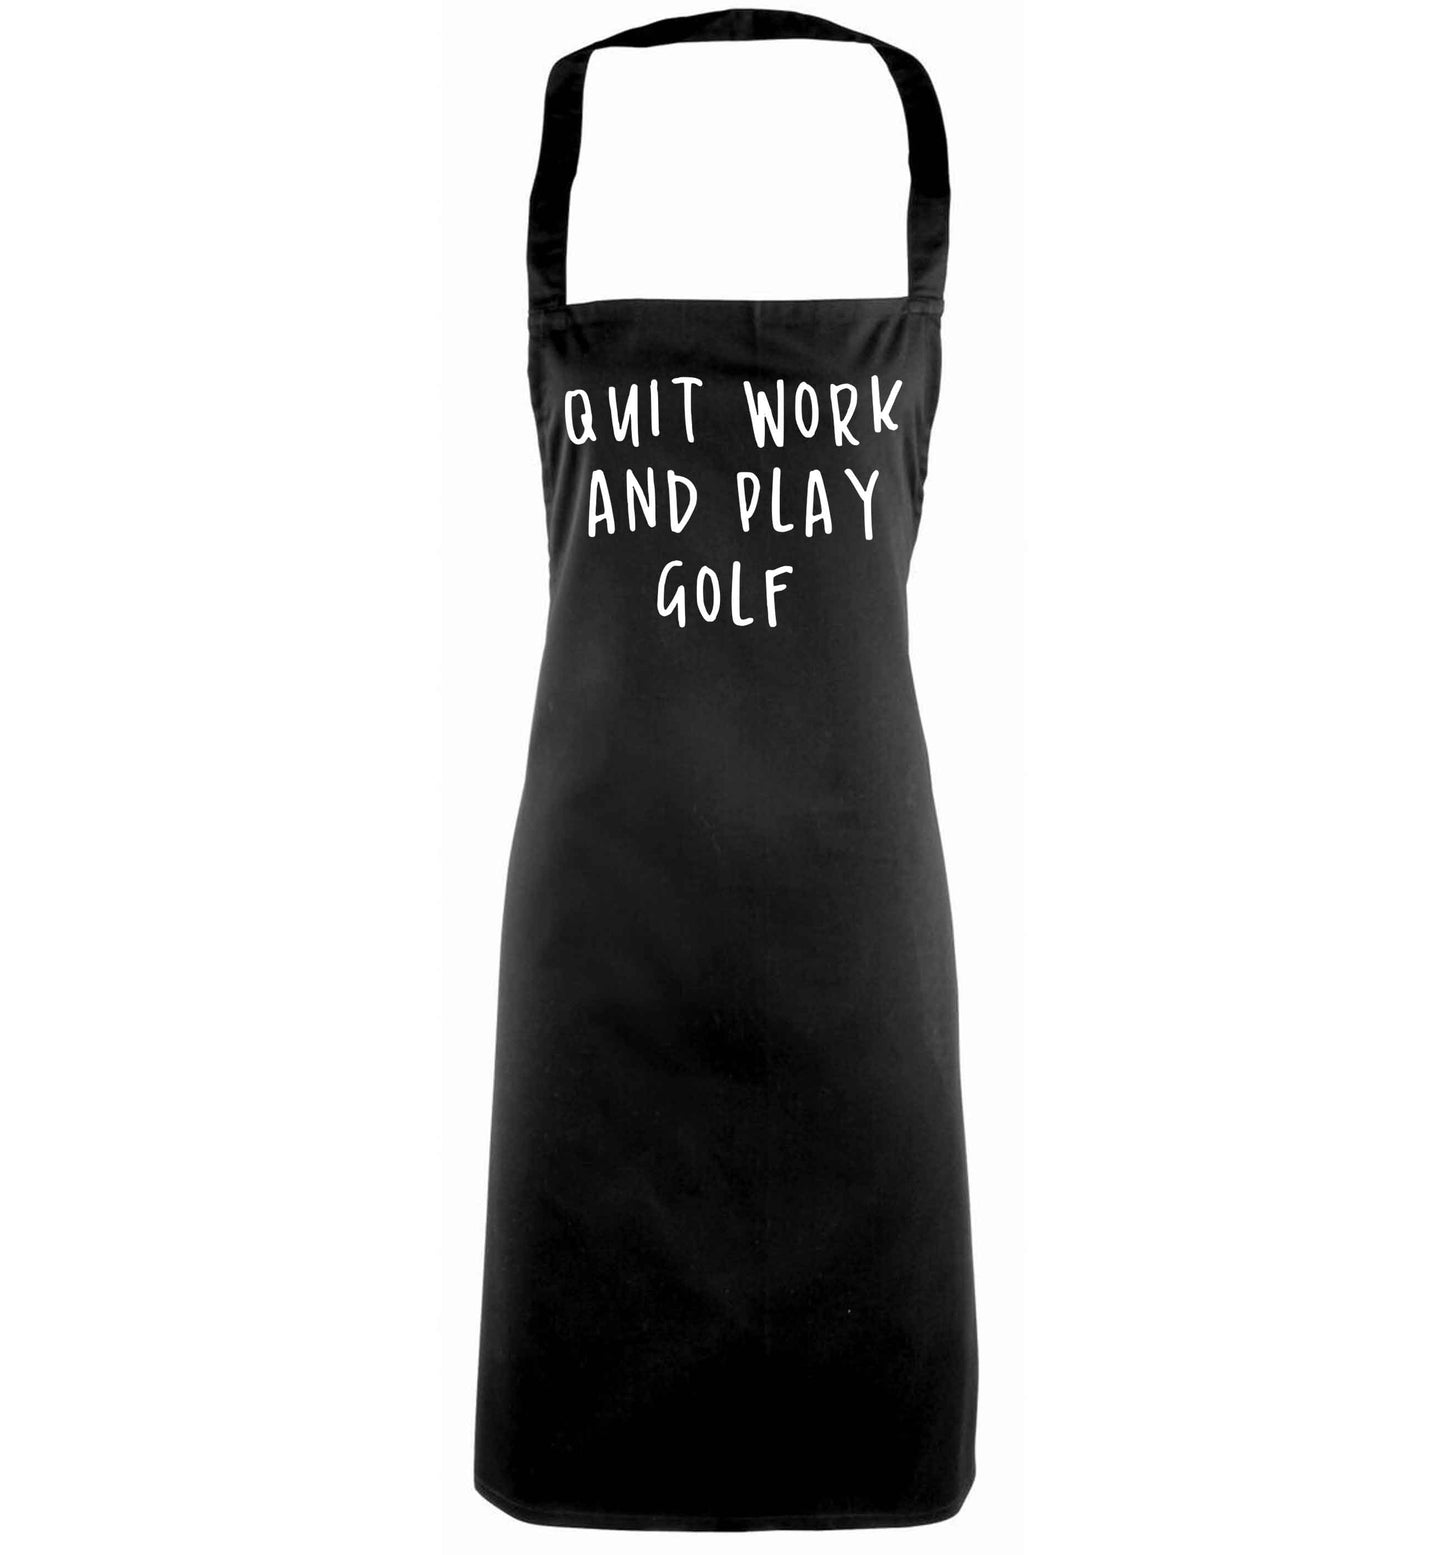 Quit work and play golf black apron